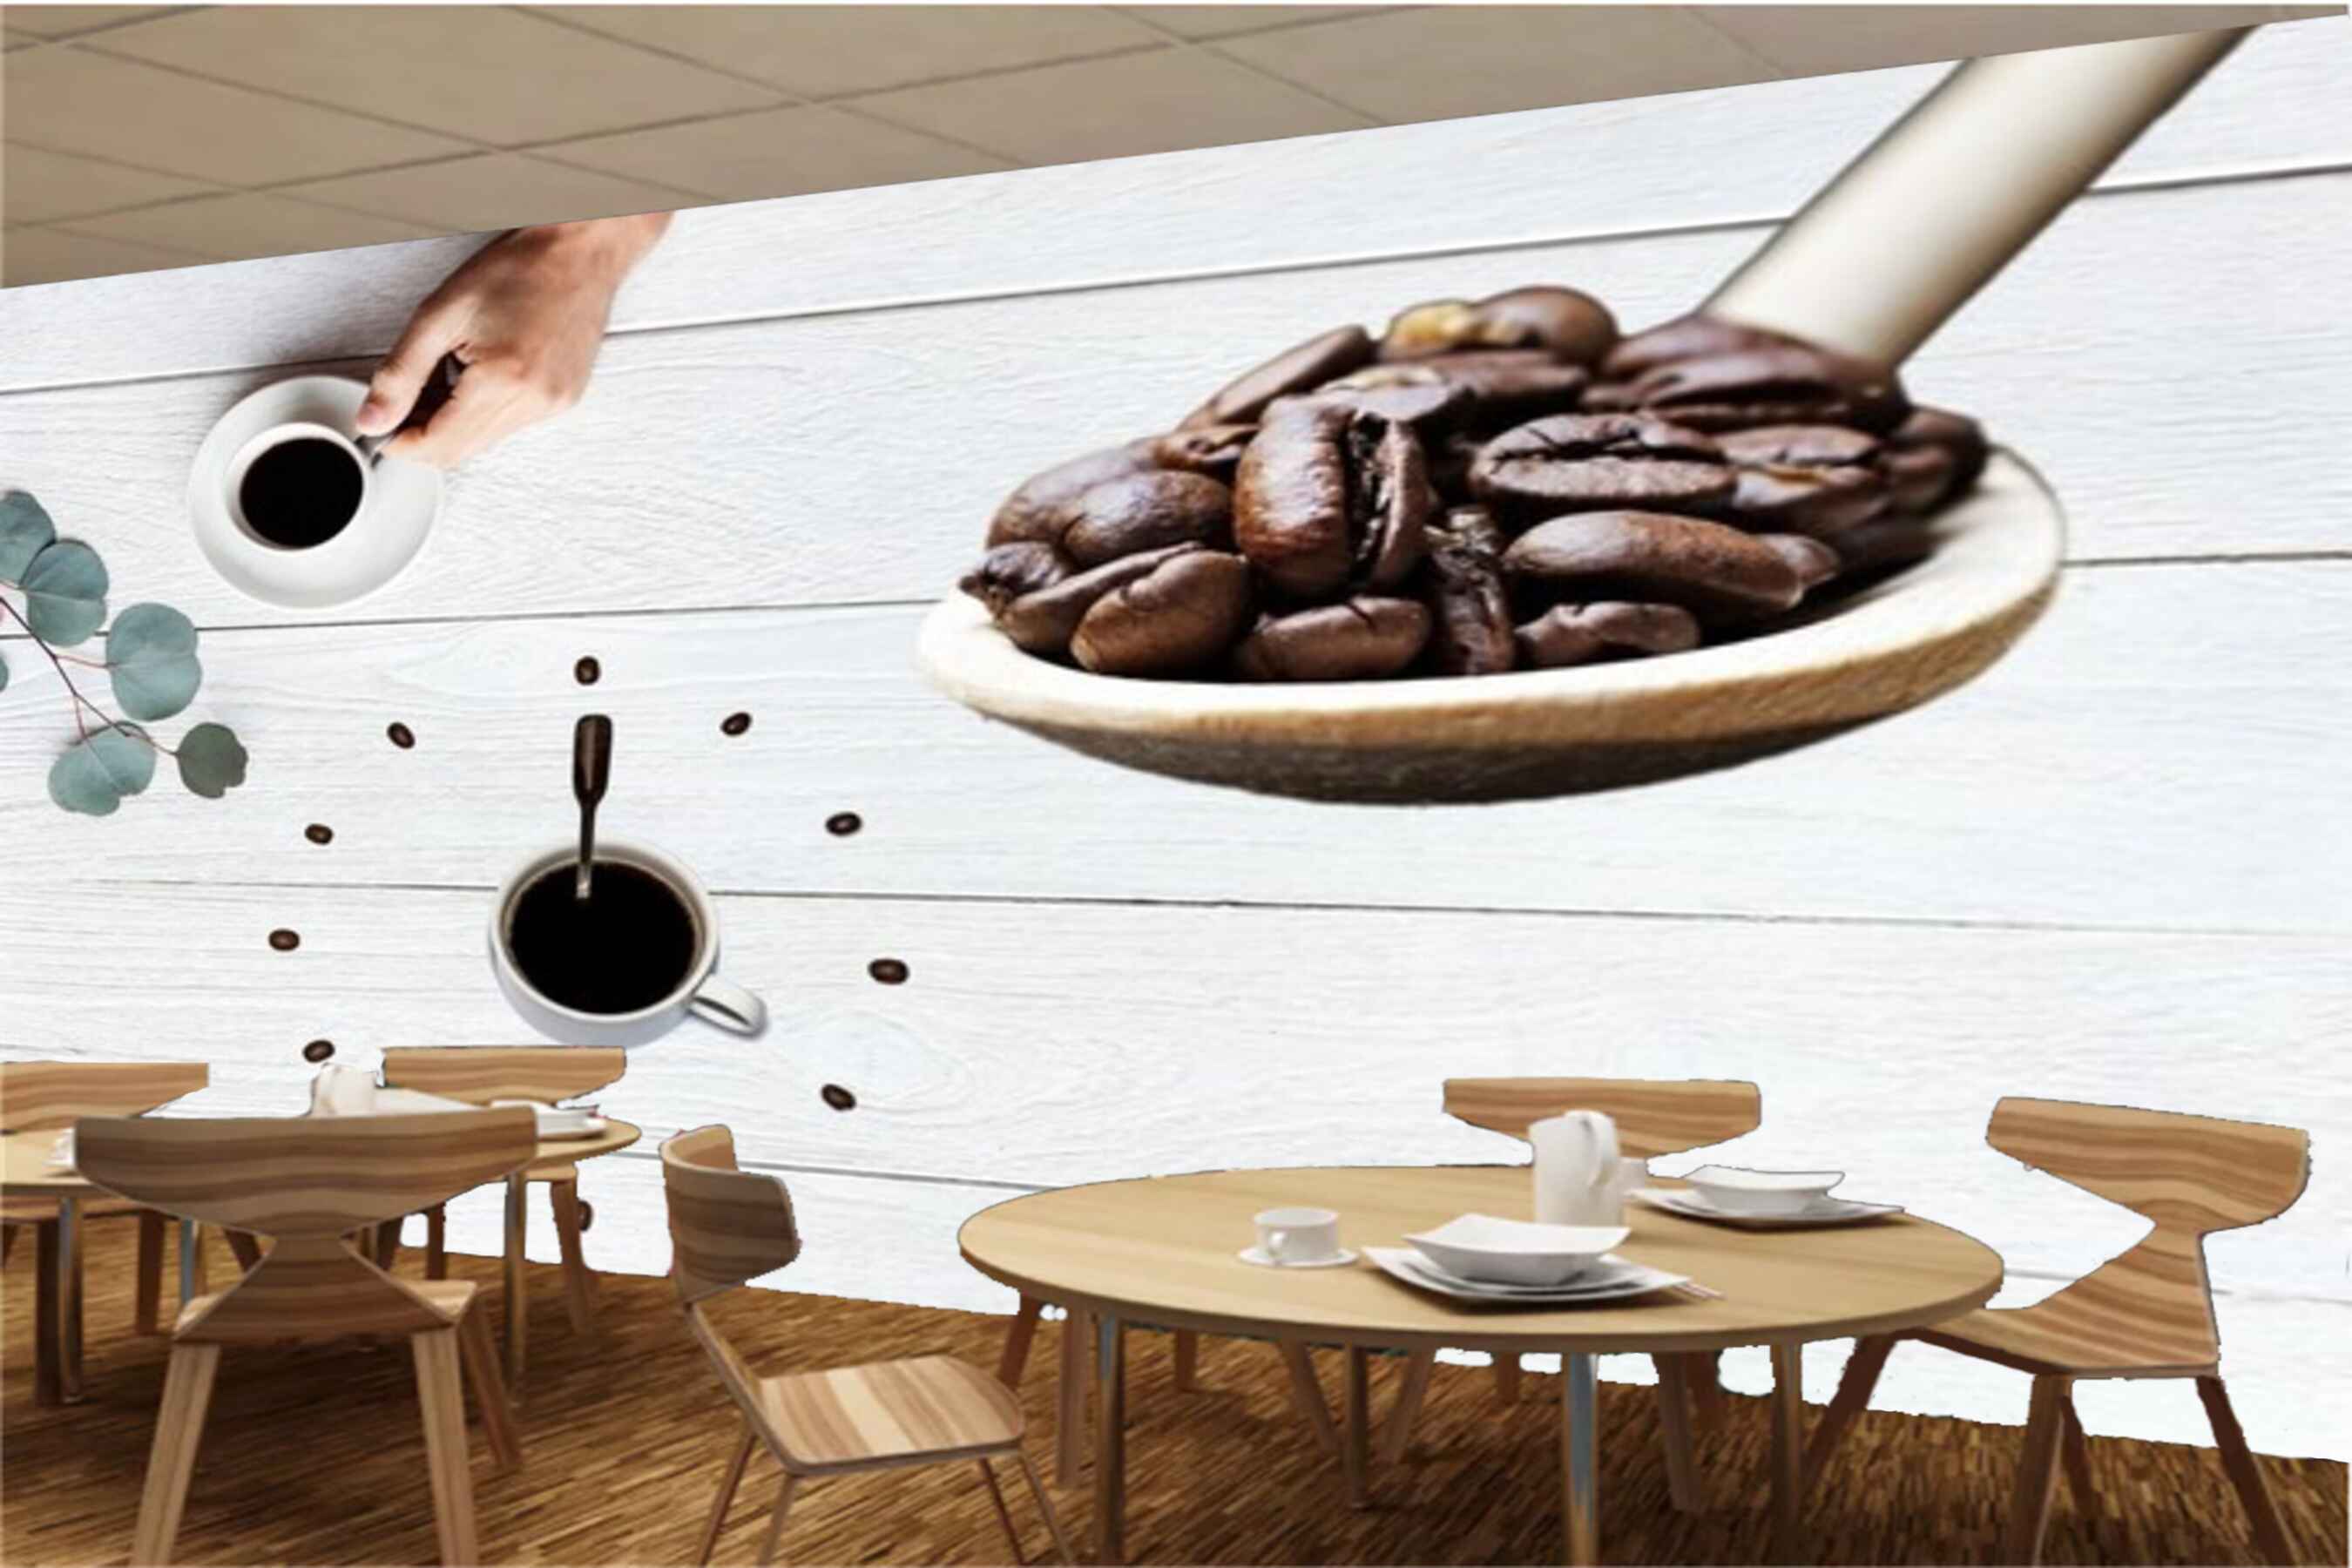 Avikalp MWZ3088 Coffee Beans Cups Leaves HD Wallpaper for Cafe Restaurant